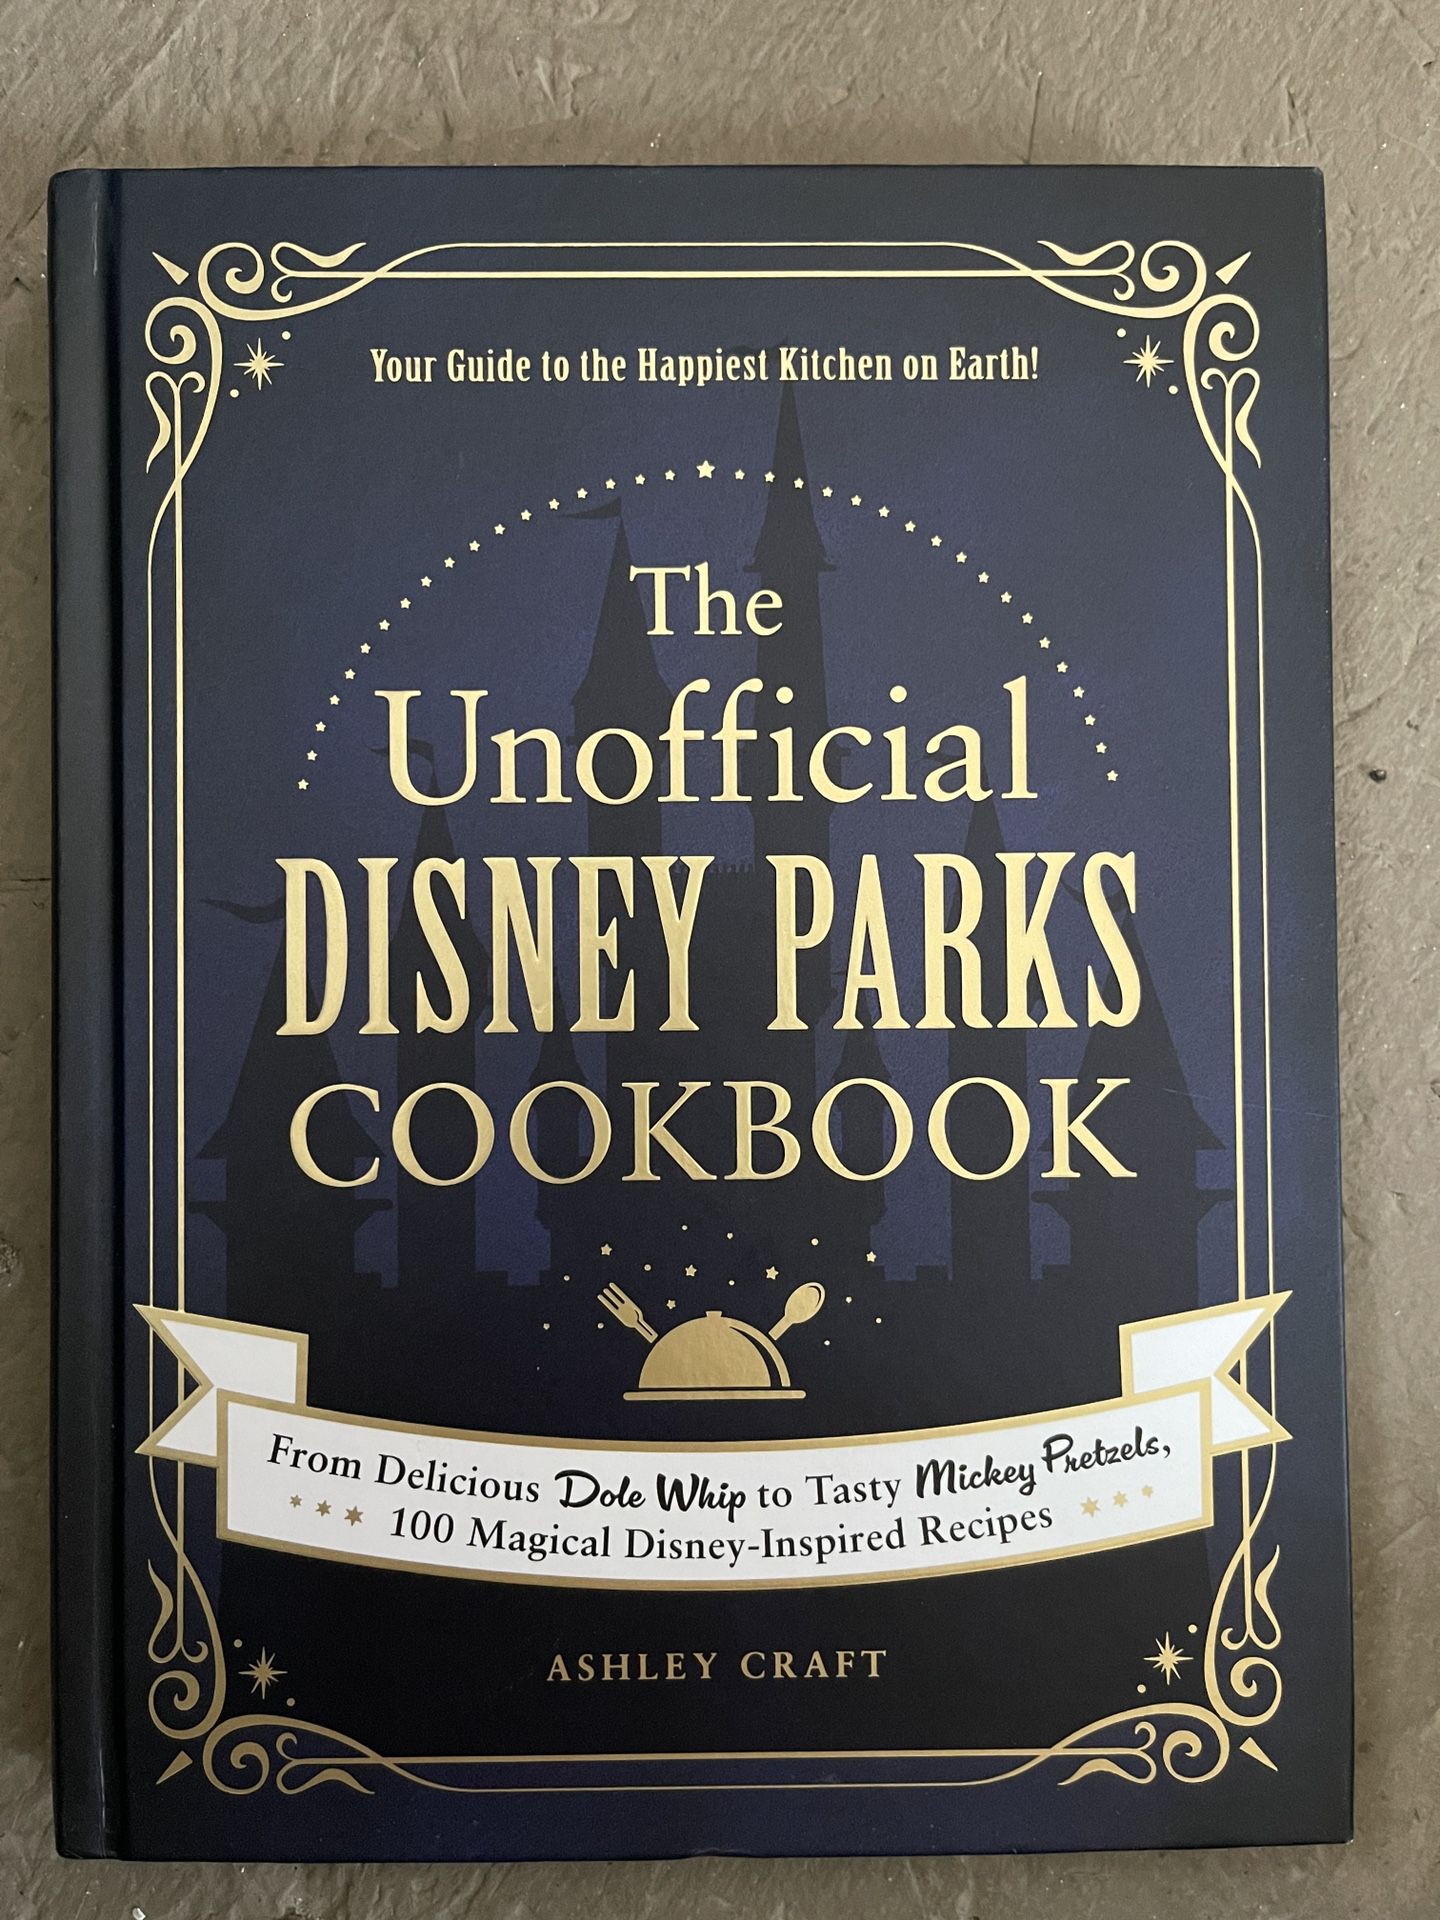 The Unofficial Disney Parks Cookbook From Delicious Dole Whip to Tasty Mickey